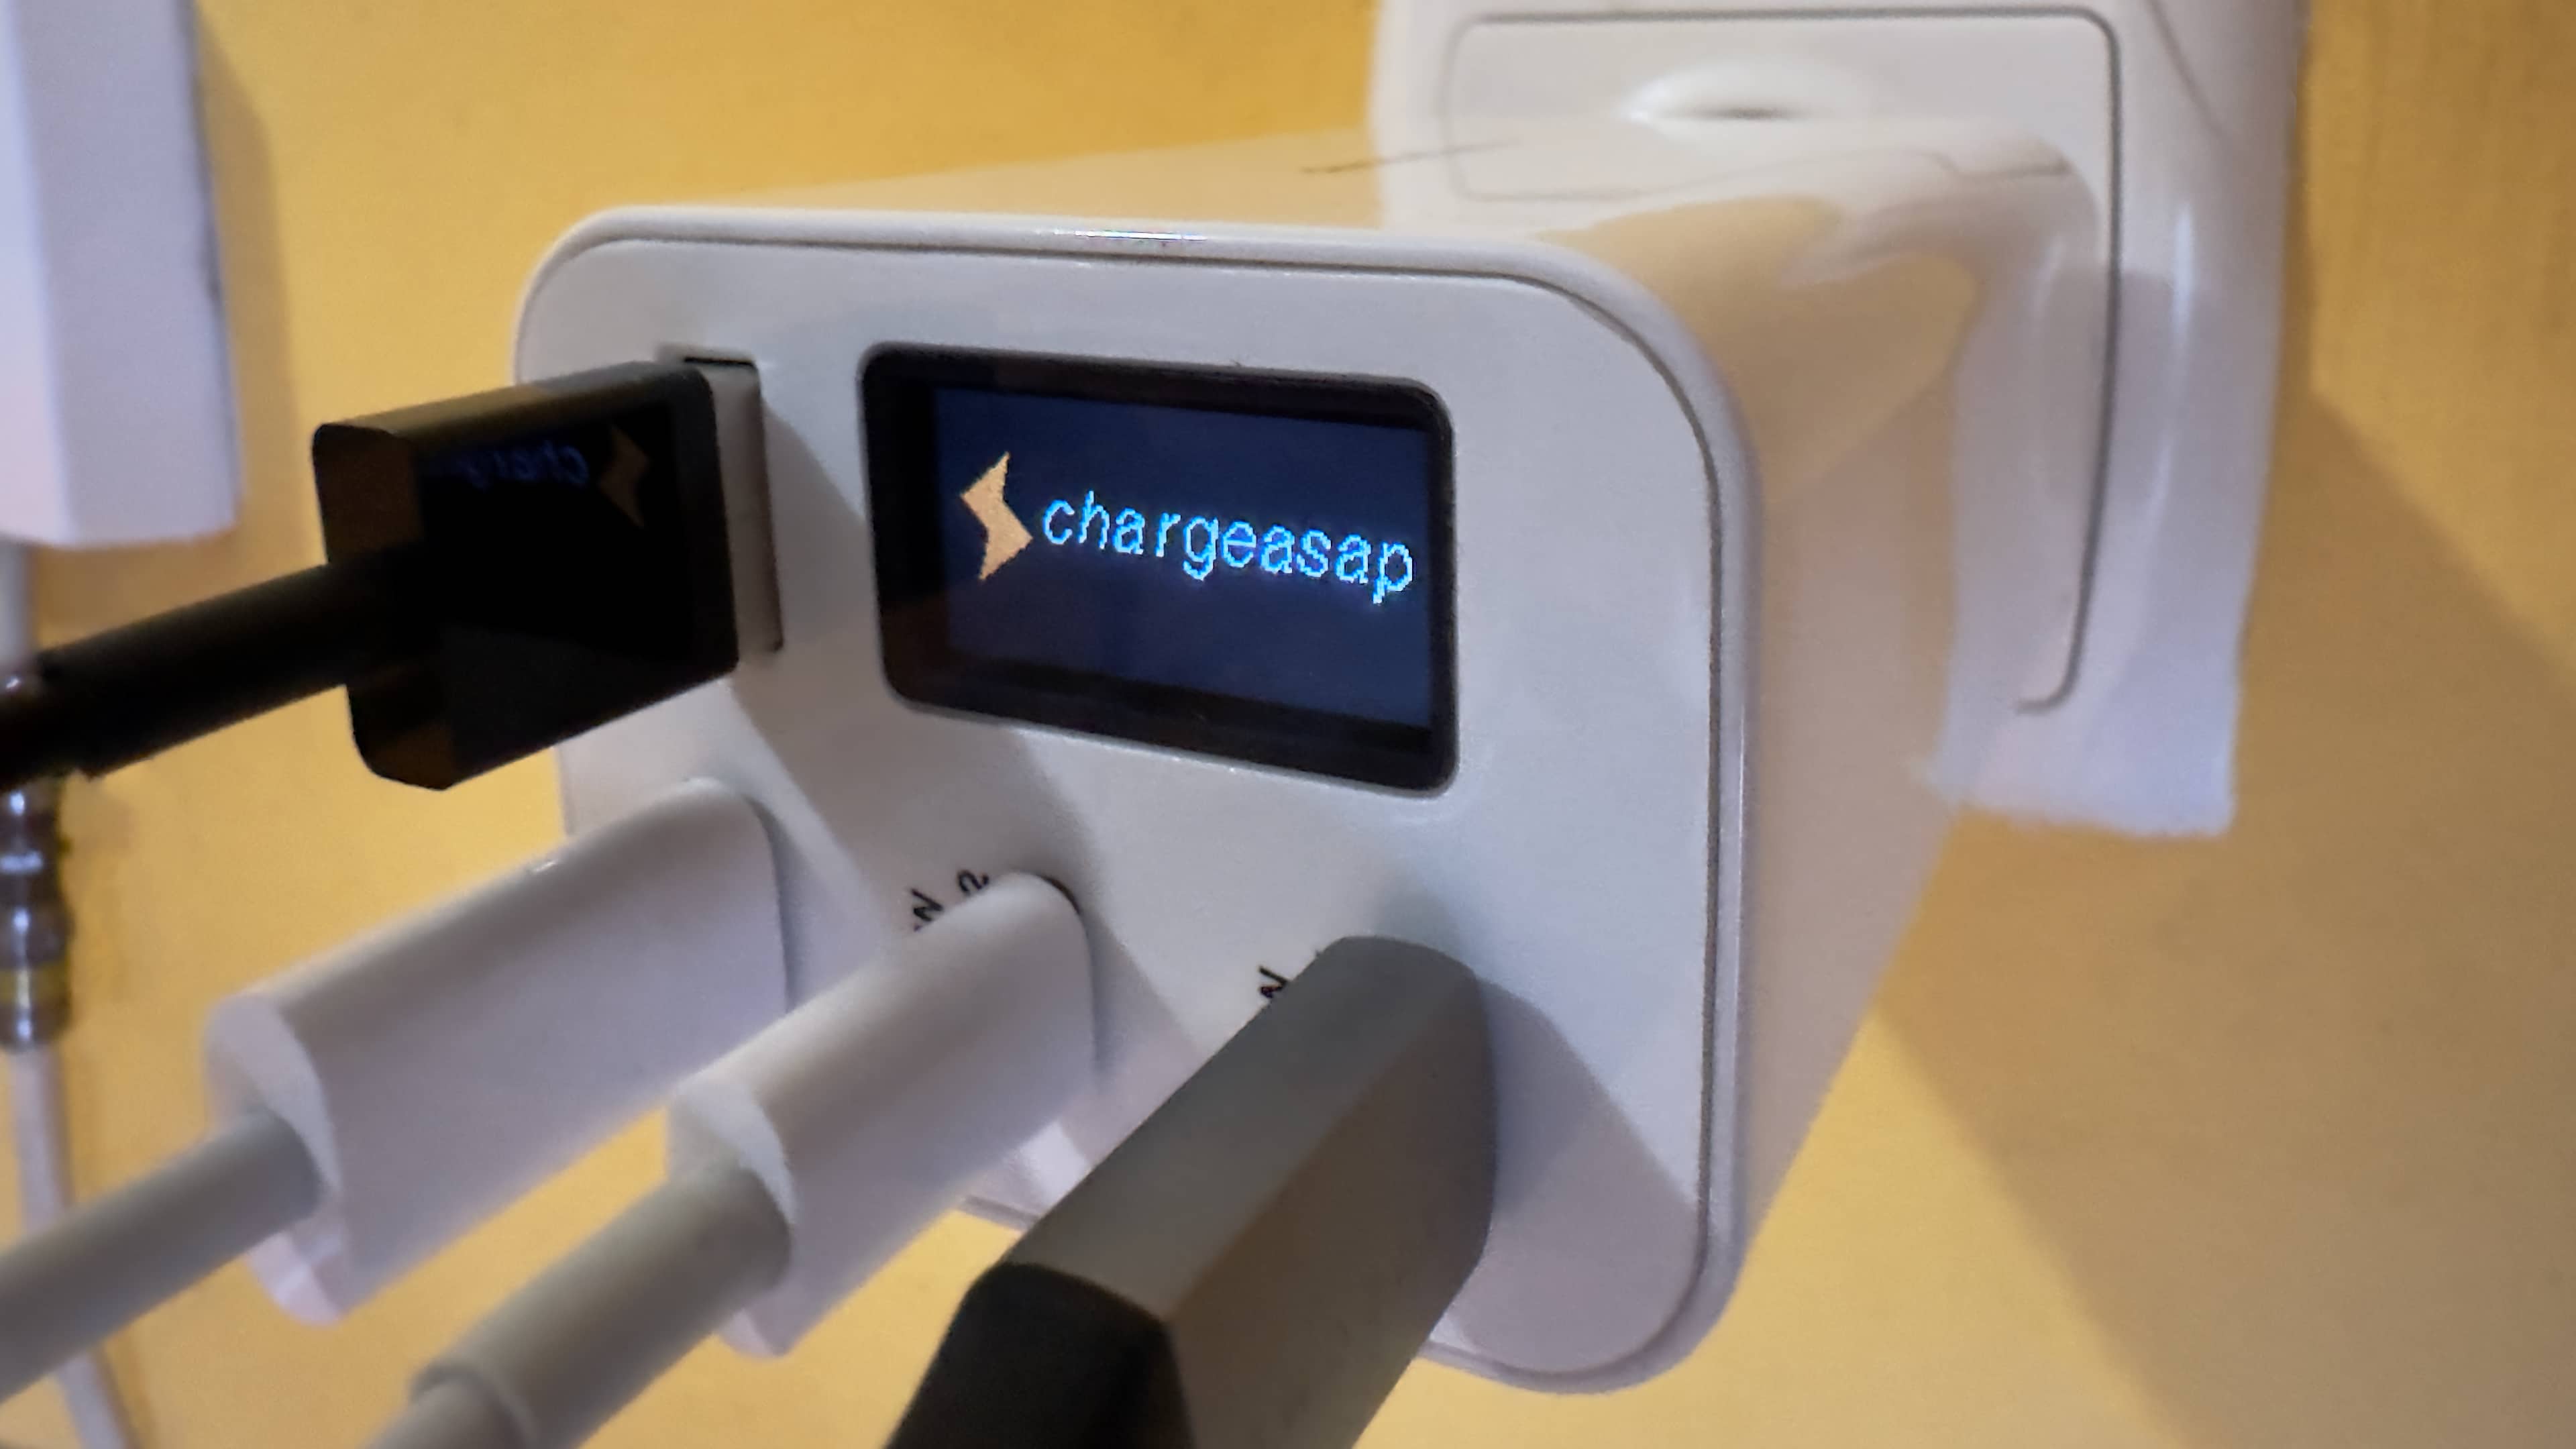 Closeup of Chargeasap's 150W Zeus power adapter plugged into a wall outlet, with cables in all of its USB ports and the OLED display showing branding logo